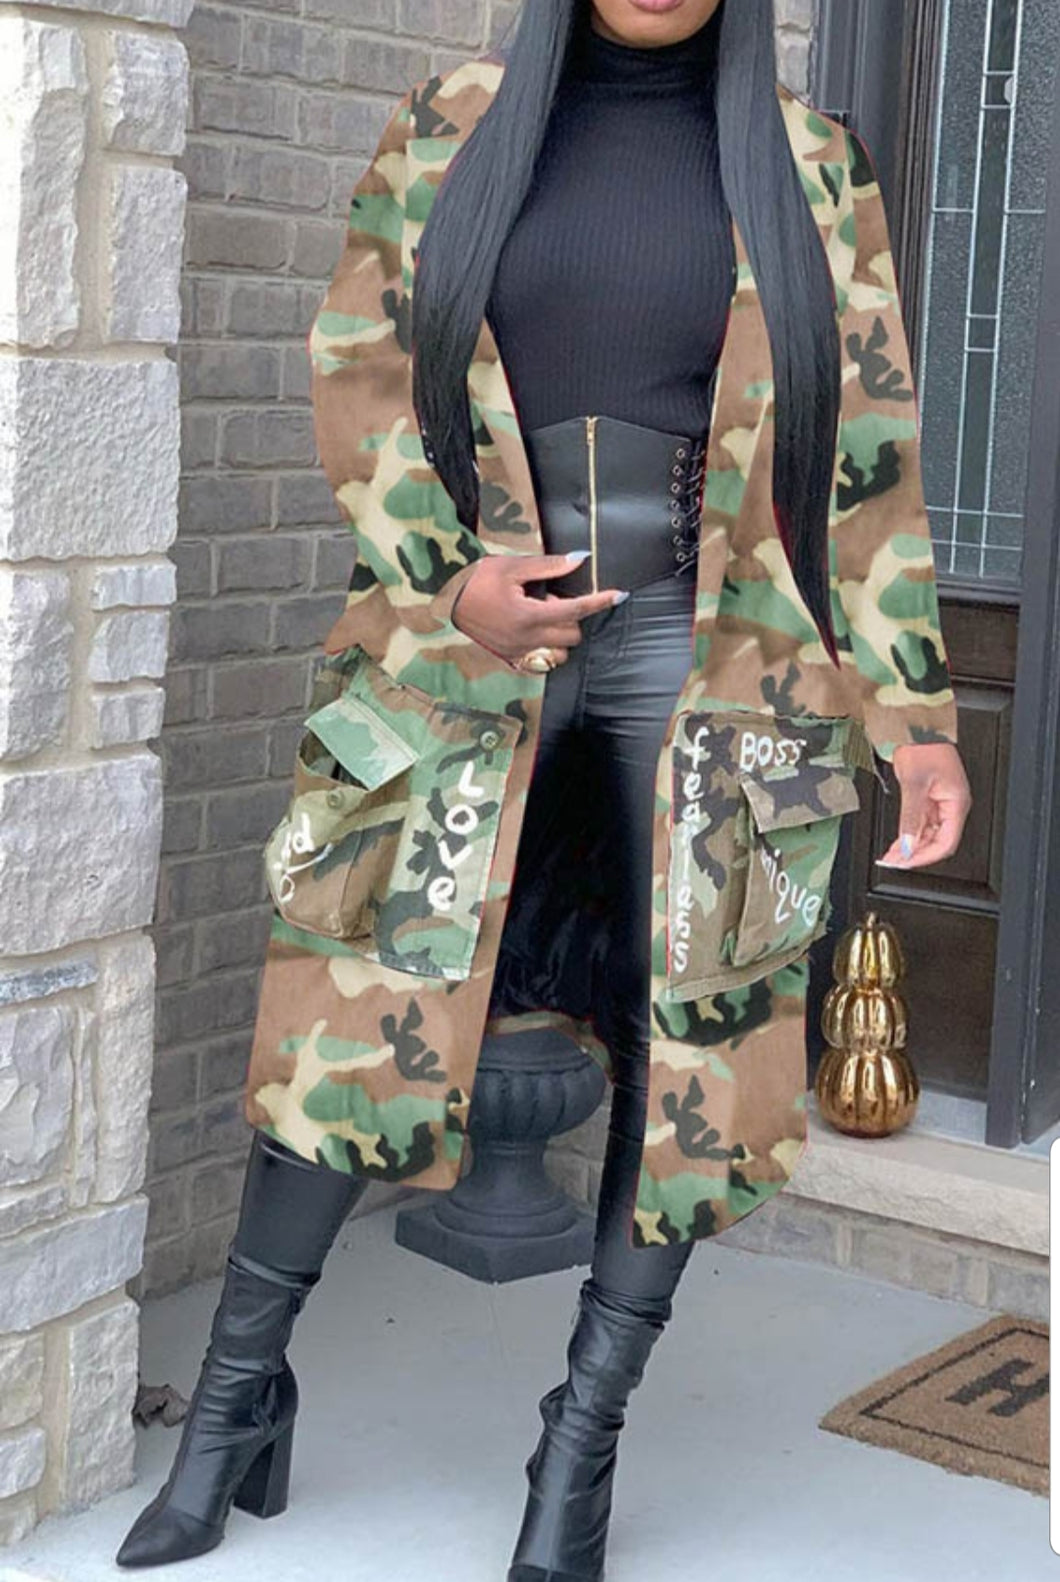 Sis You Fly Camouflage Jacket.This jacket is also available in multicolor letters when you click the color drop down button below. Please cashapp $KIMestryllc $7 for shipping once the jacket has been purchased through the website.